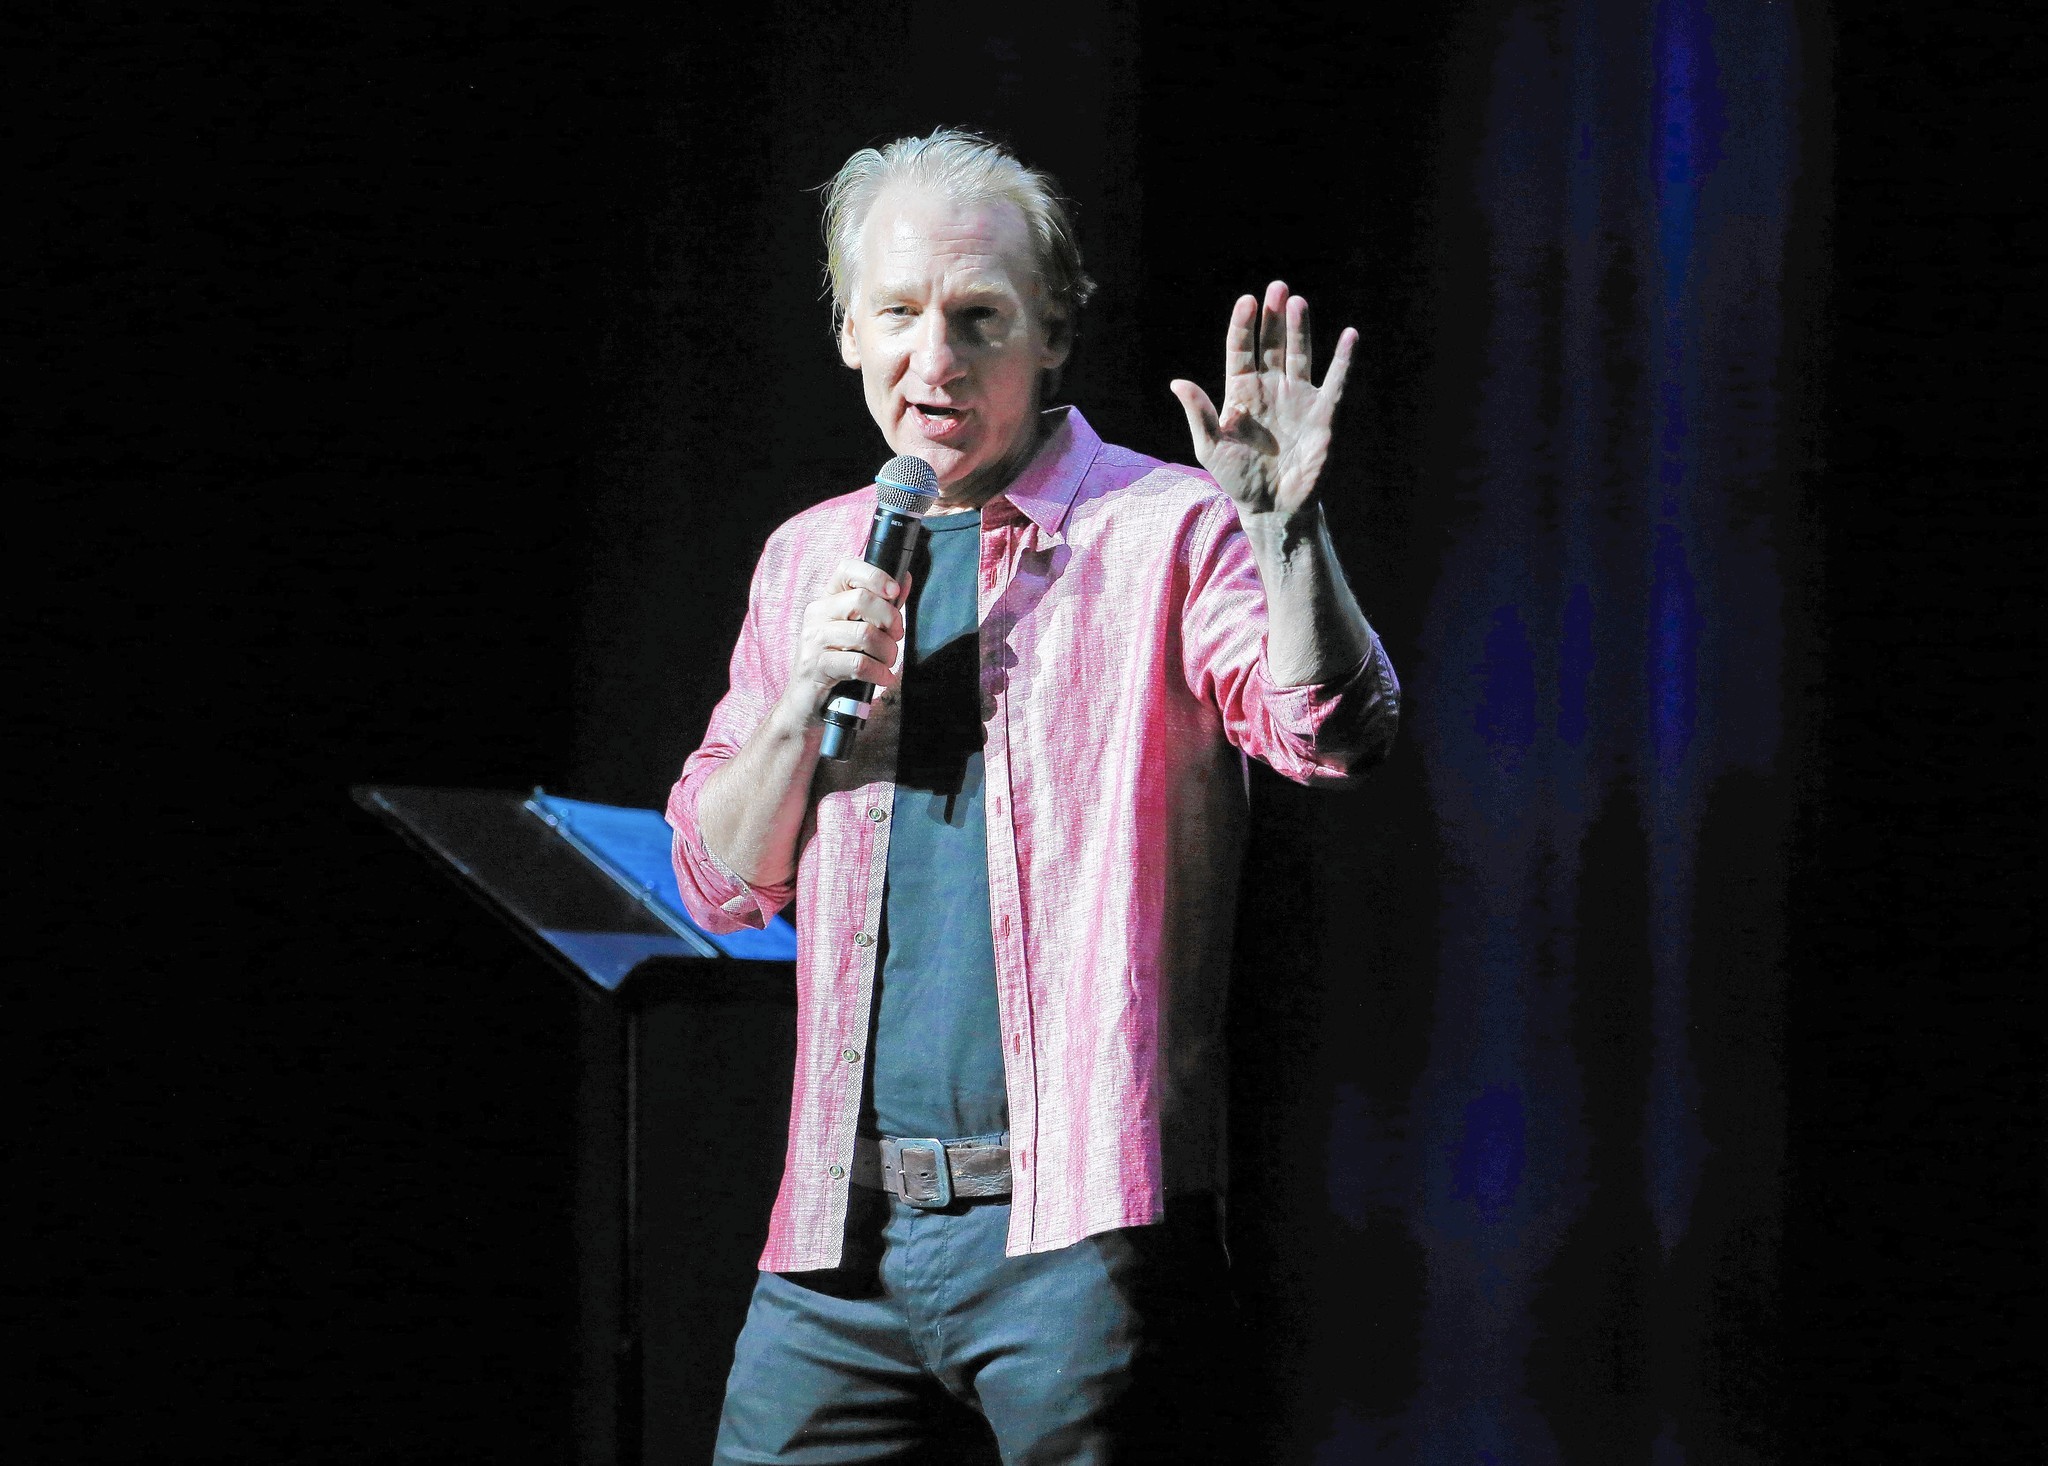 Maher needed to put away his notebook and be present at Chicago Theatre - Chicago Tribune